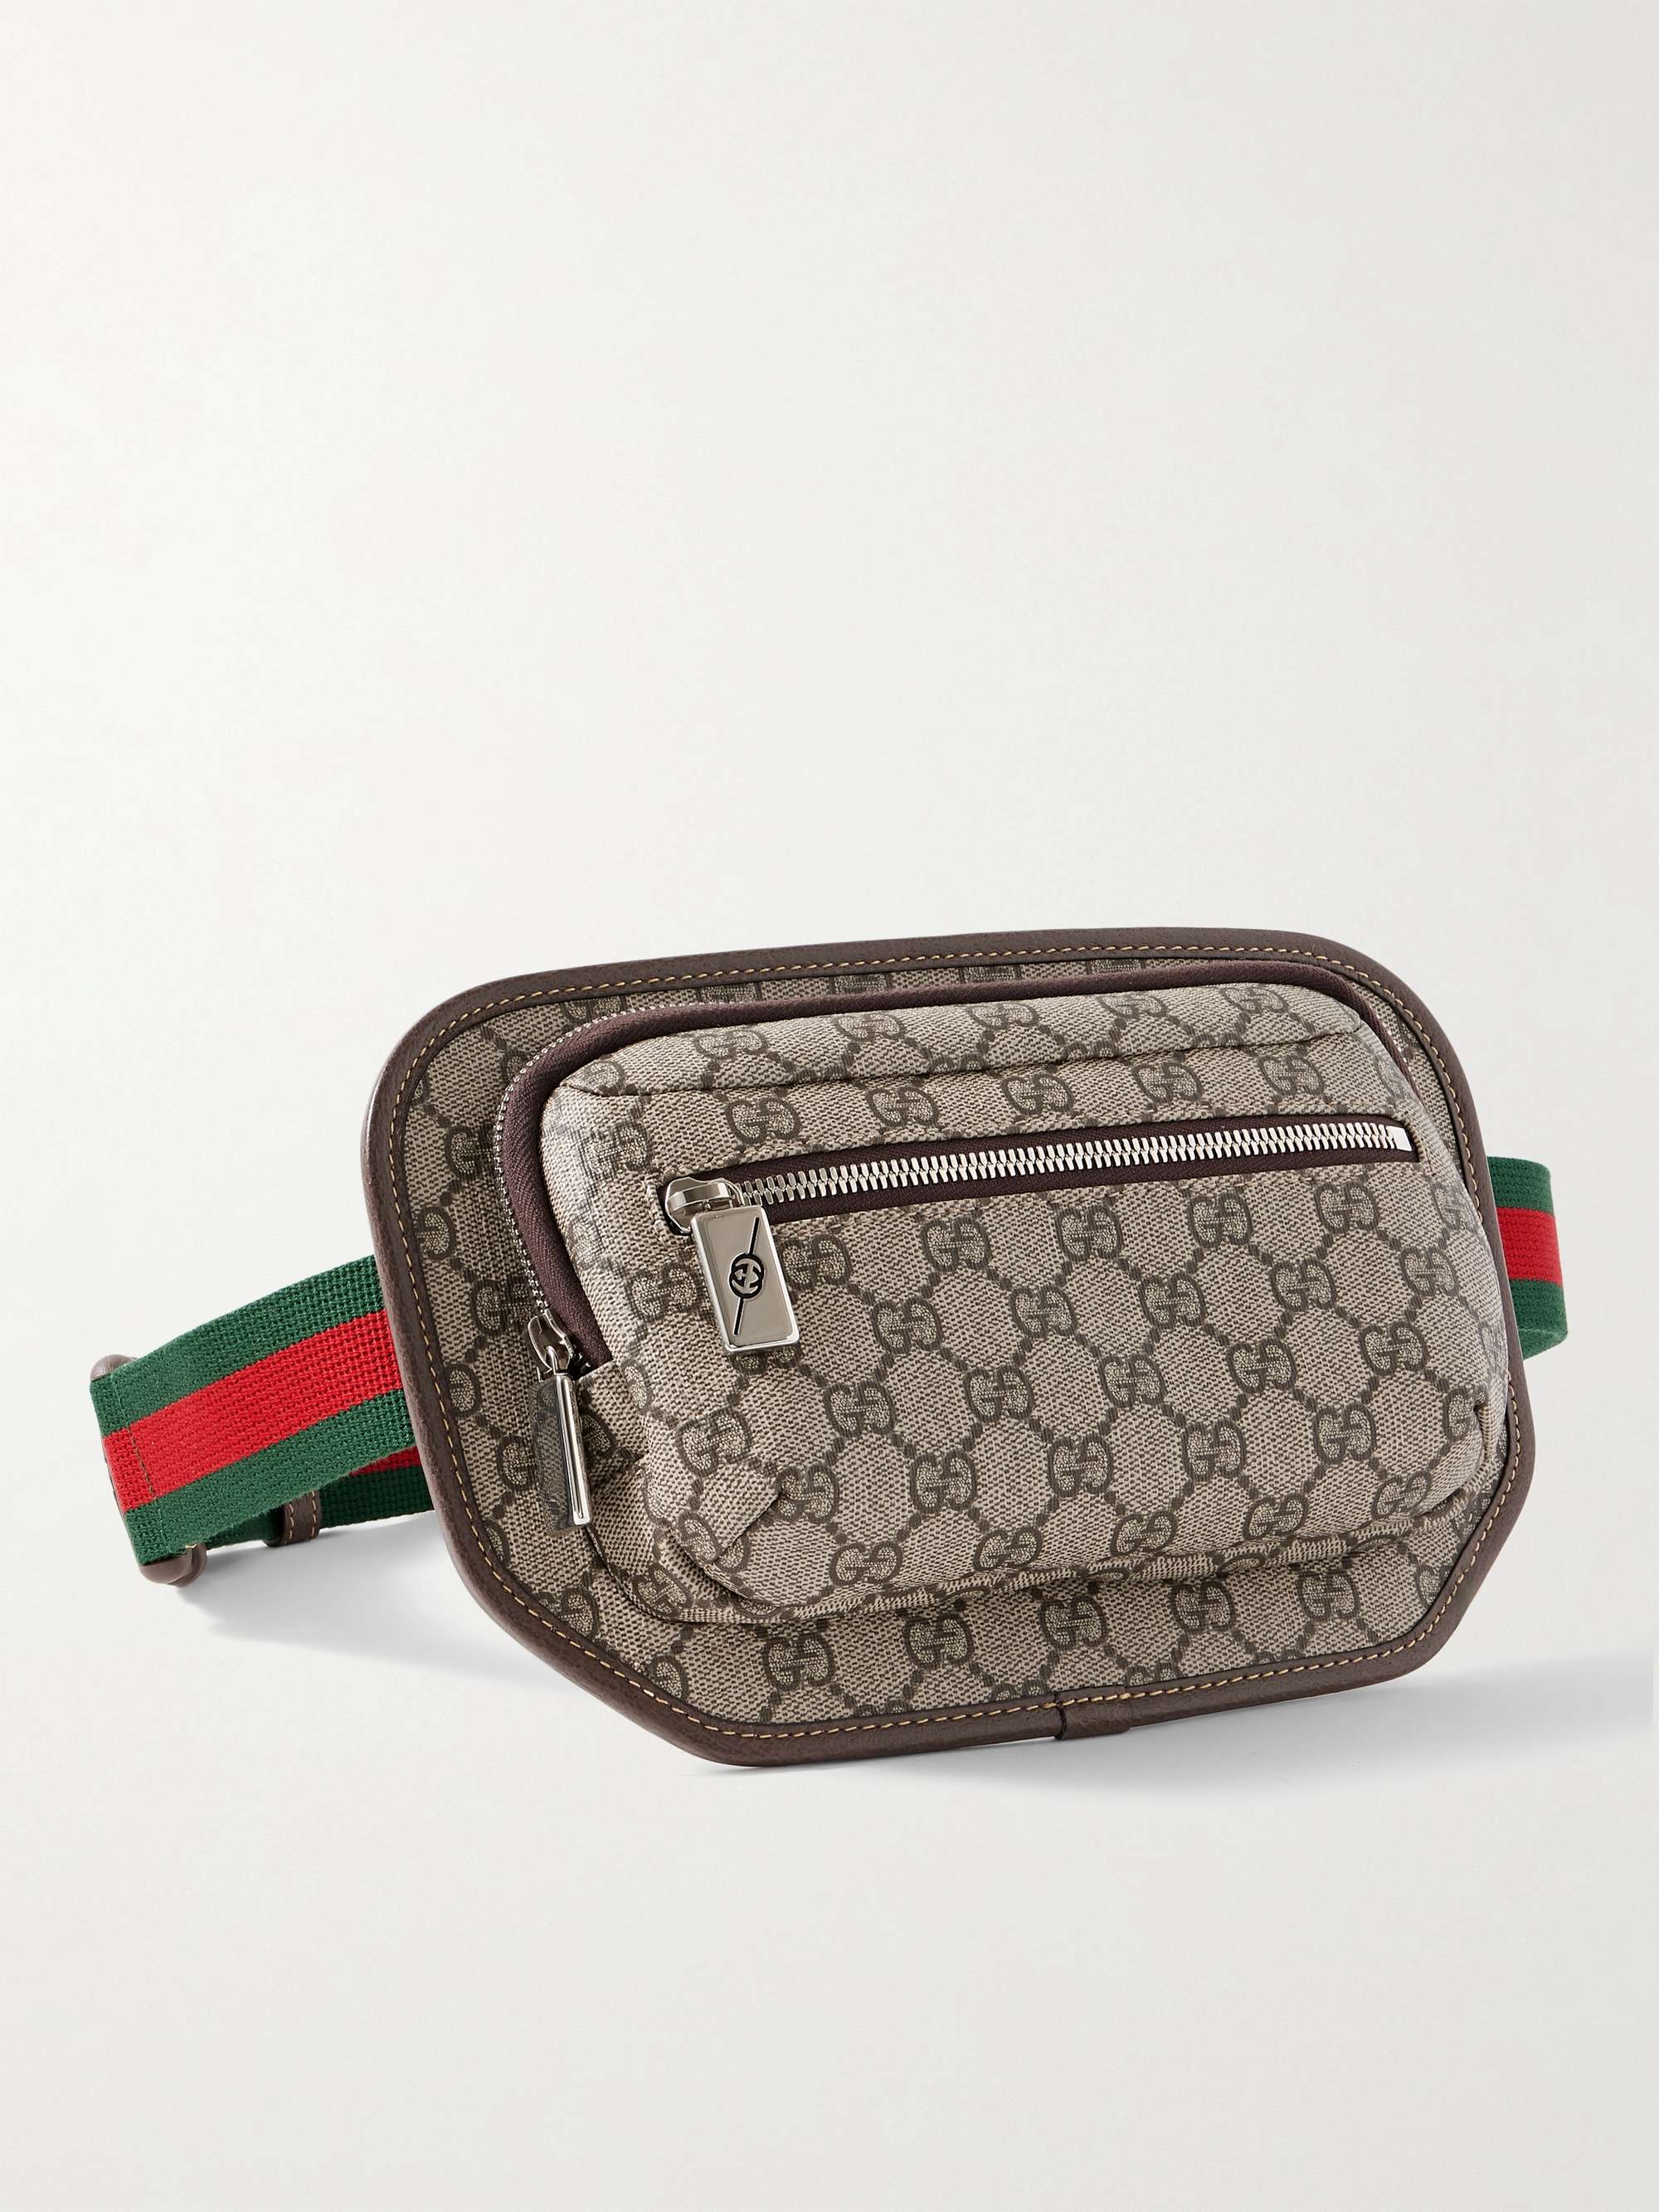 Gucci Ophidia Leather-trimmed Monogrammed Coated-canvas Belt Bag - Men - Gray Bags